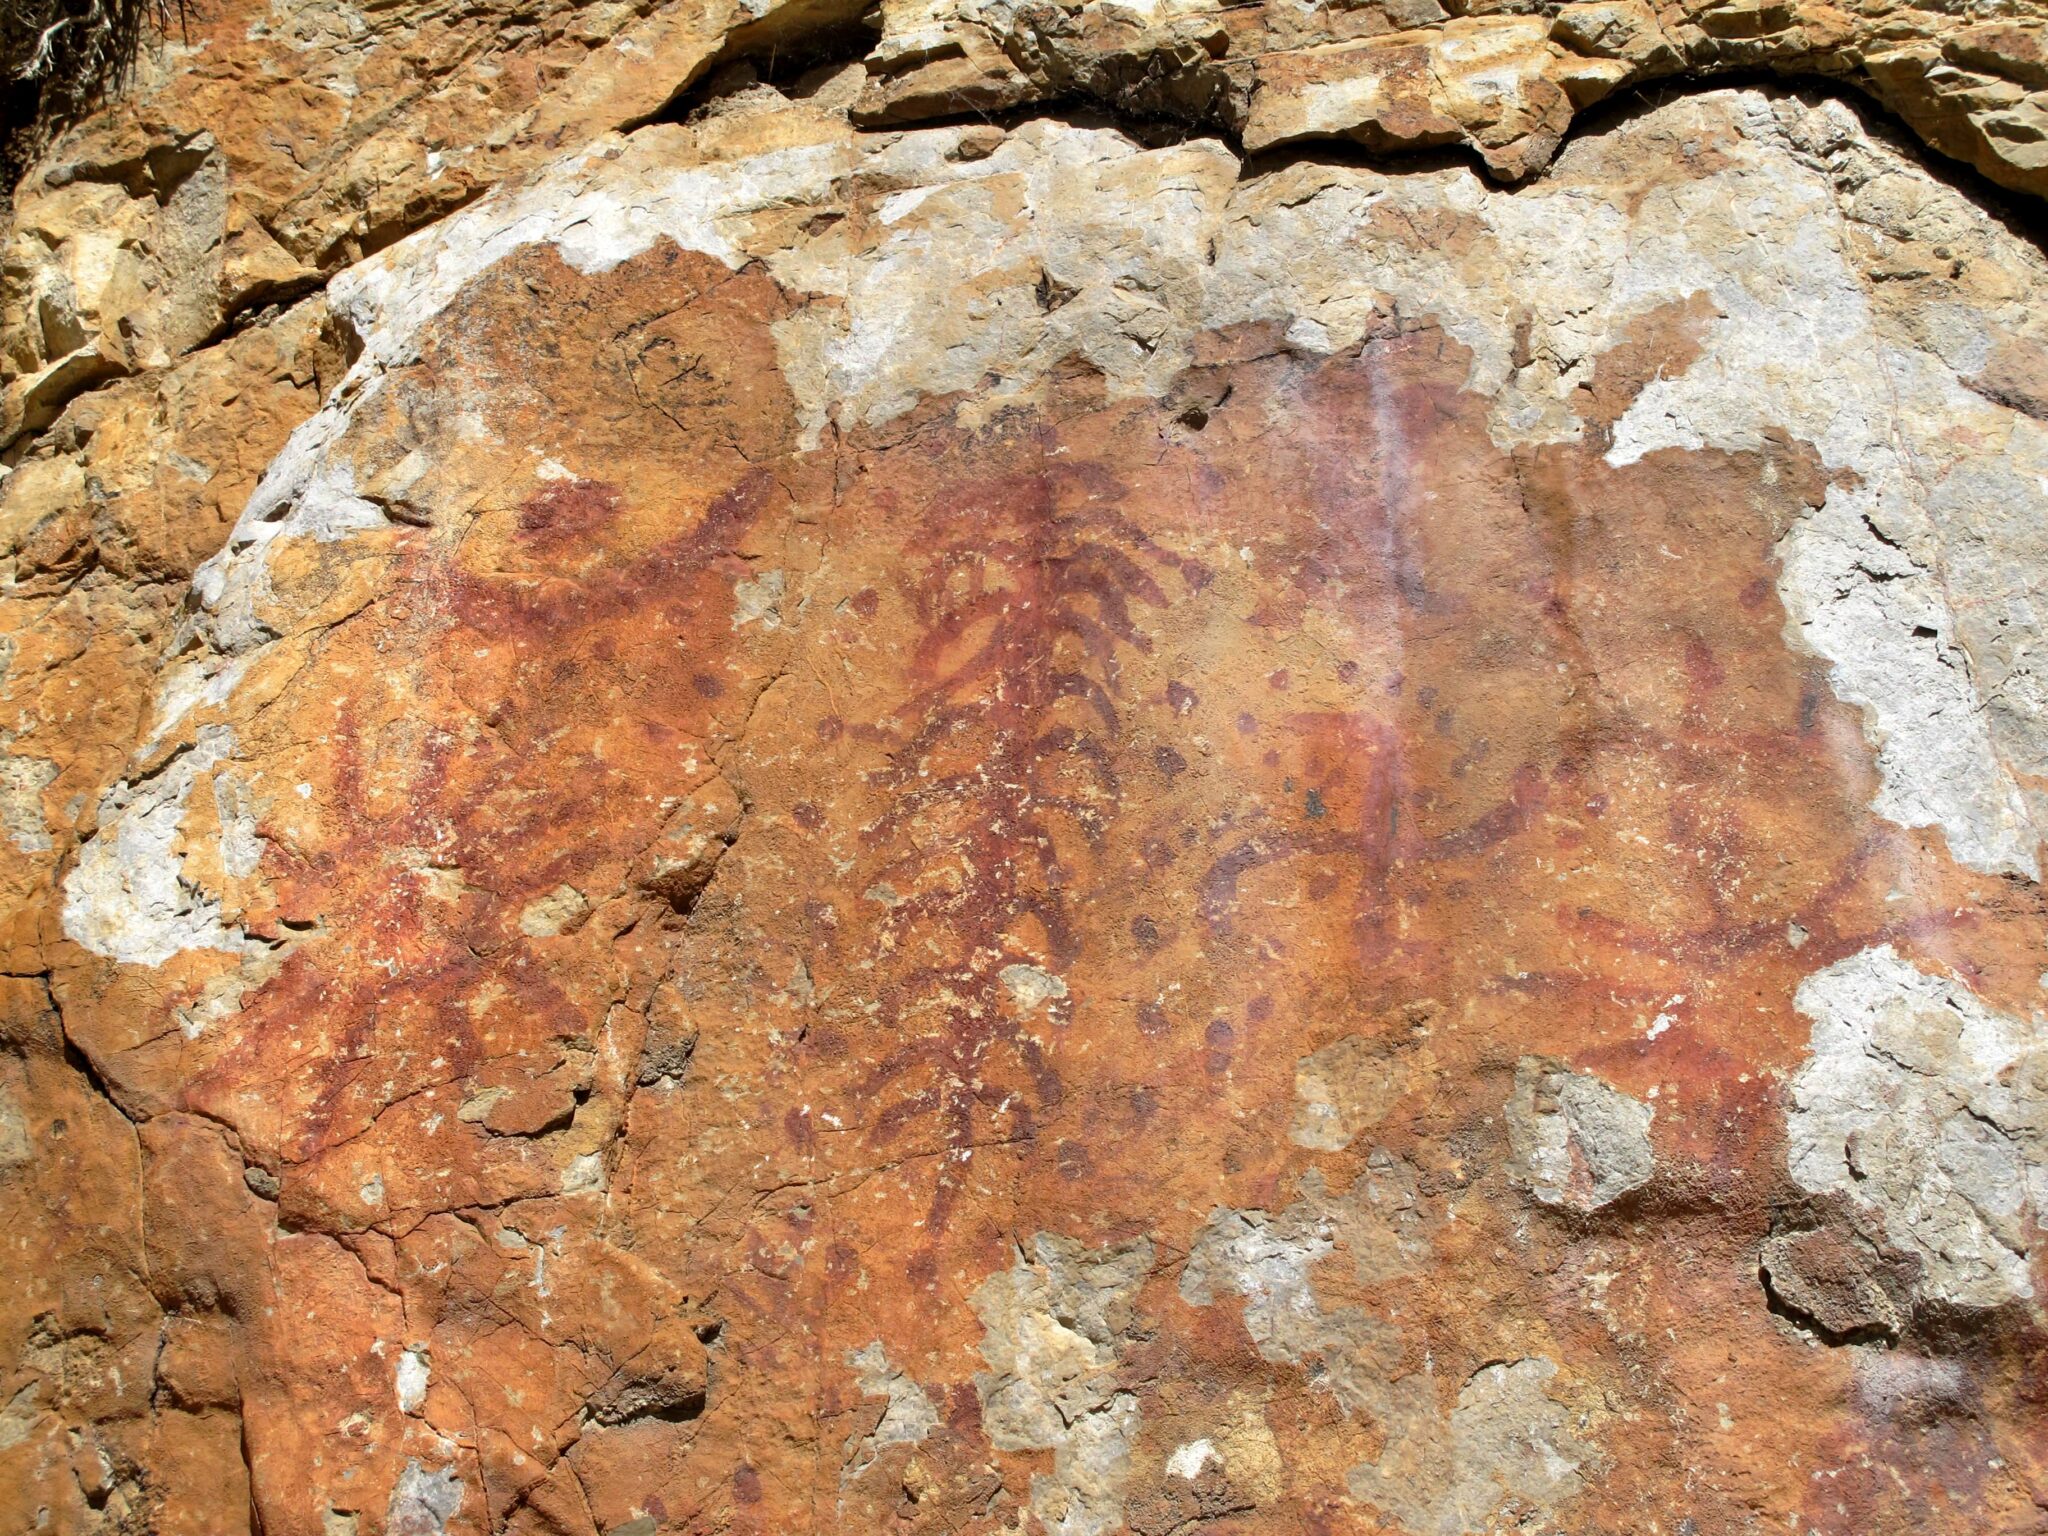 Natural and symbolic motifs painted in red on weathered orange rock face